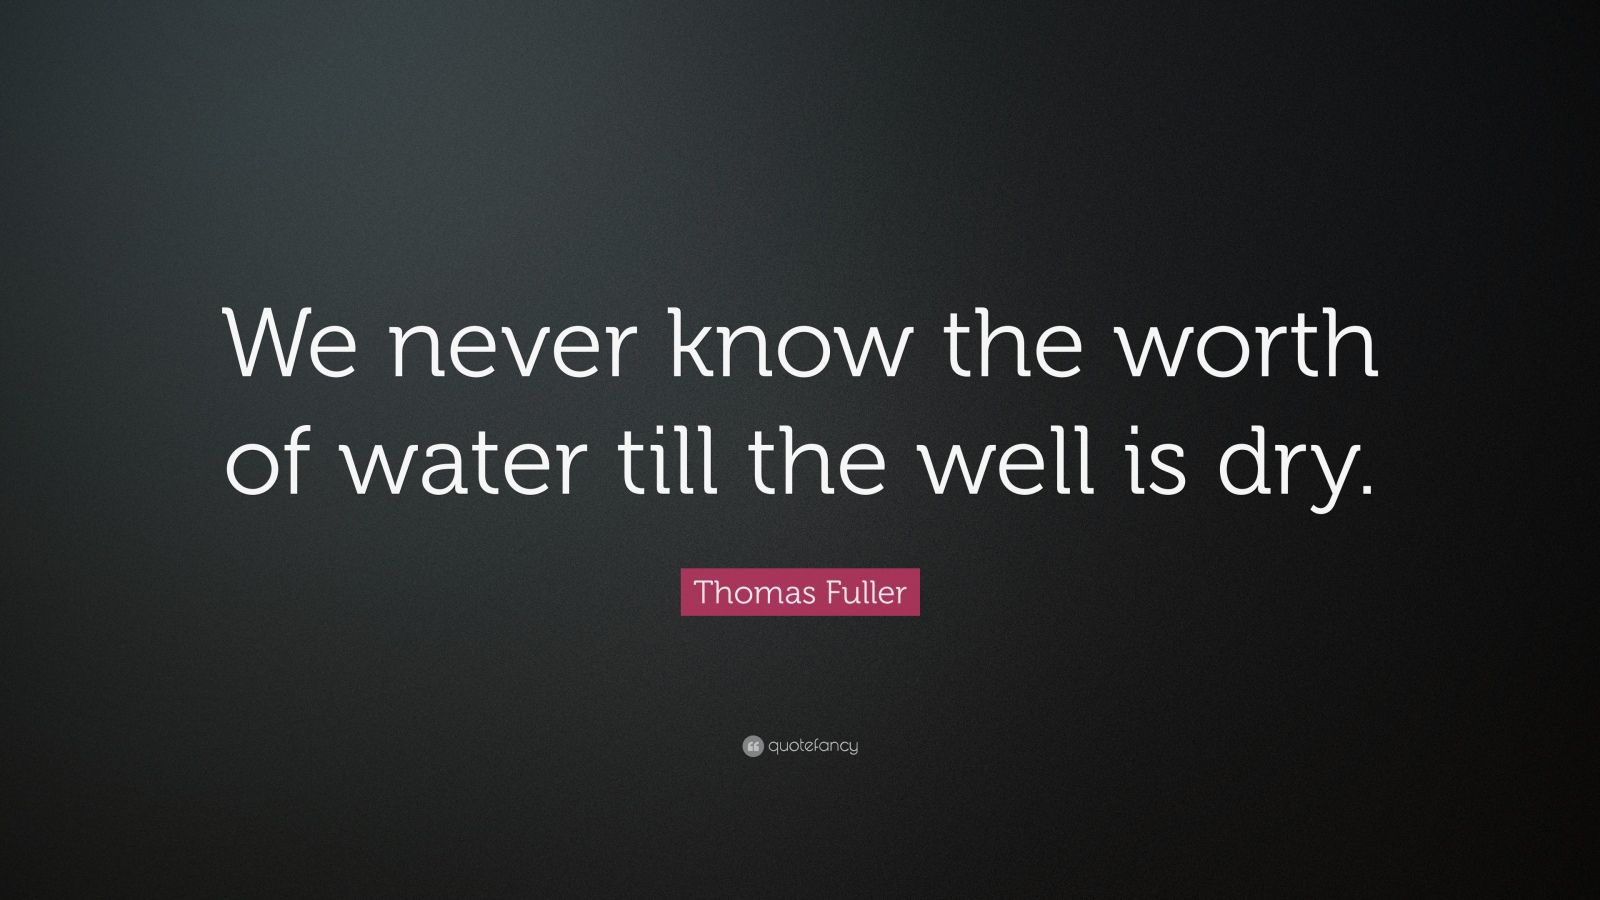 Thomas Fuller Quote: “We never know the worth of water till the well is ...